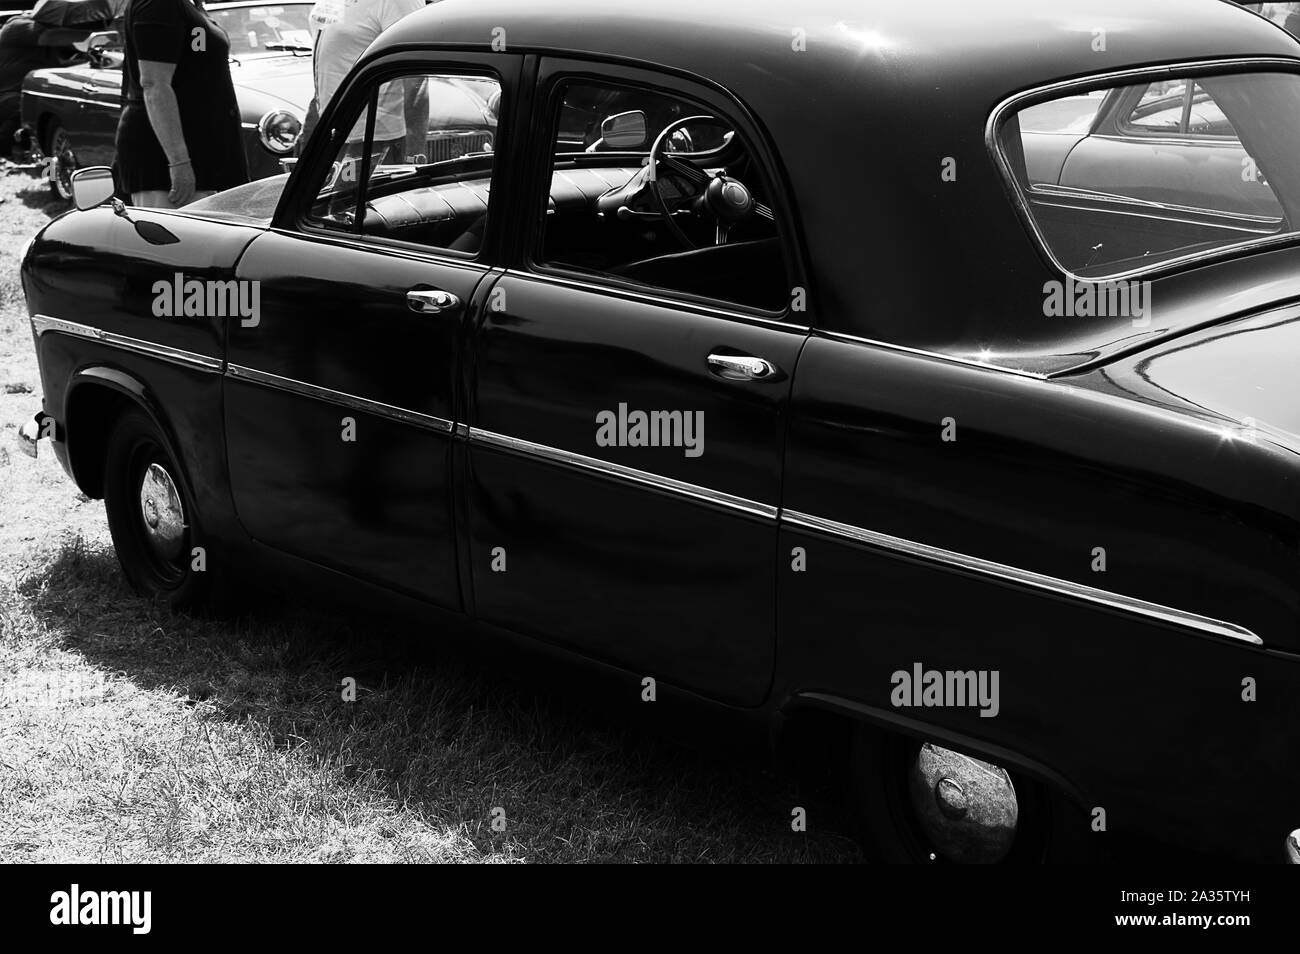 The side of a black 1955 Ford Consul  on display at a car show Stock Photo